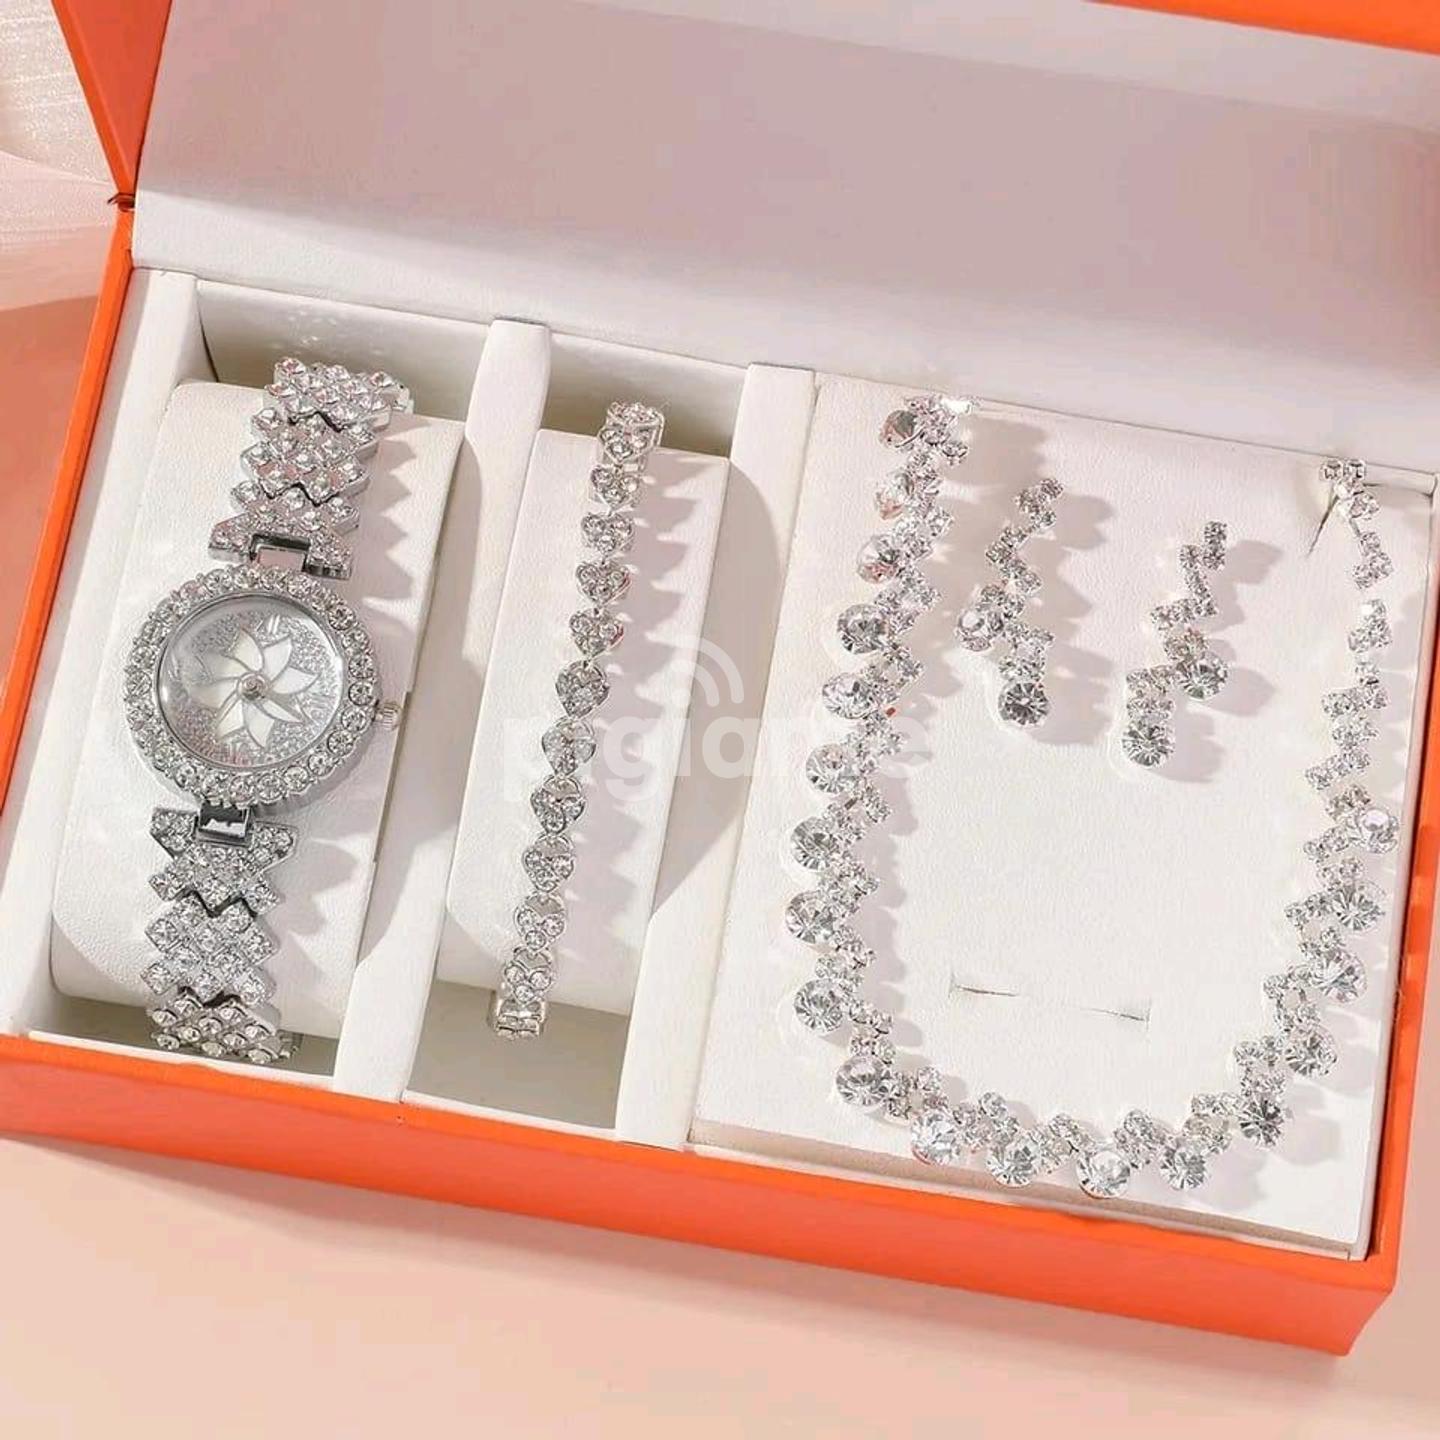 Ladies Gift Set. Watch & Necklace Set in Gift Box